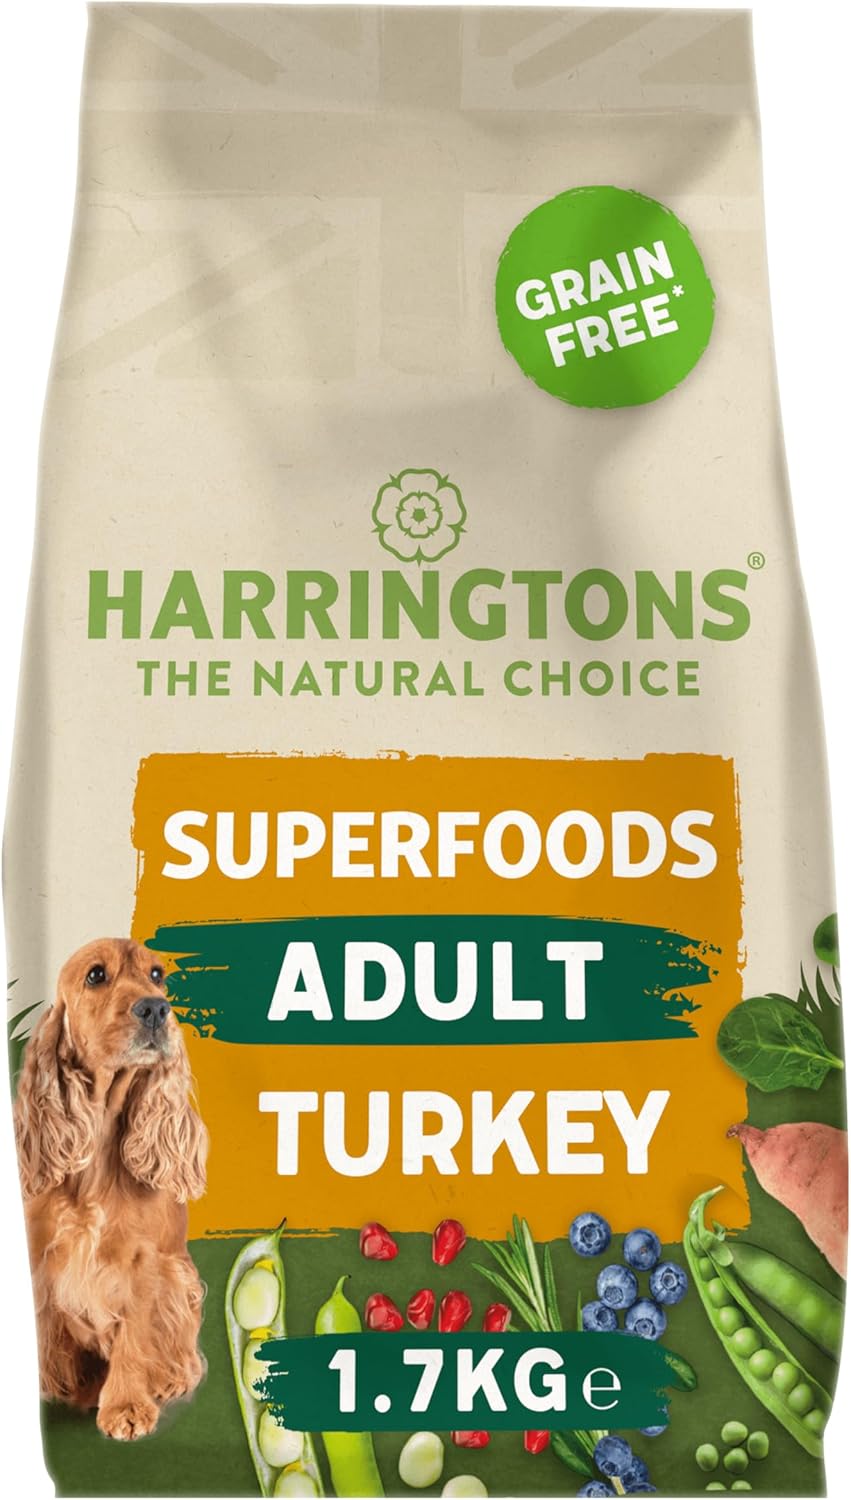 Harringtons Superfoods Complete Grain Free Hypoallergenic Turkey with Veg Dry Adult Dog Food 1.7kg (Pack of 4) - Made with All Natural Ingredients?HARRGFST-C1.7